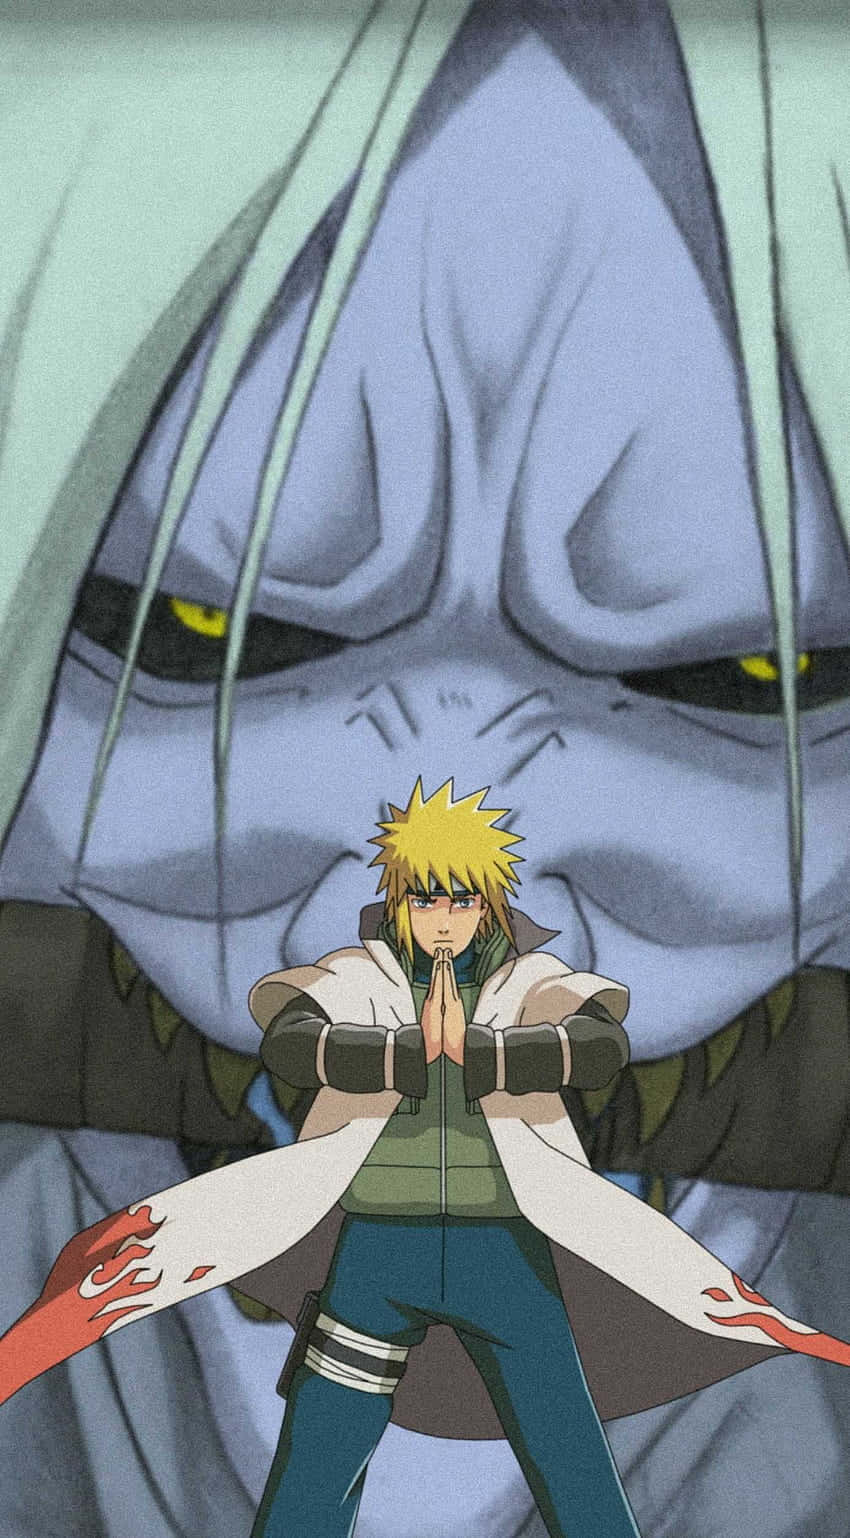 Onaruto - Naruto - Naruto - Naruto - Naruto - Naruto (this Would Be The Same In Swedish) Wallpaper